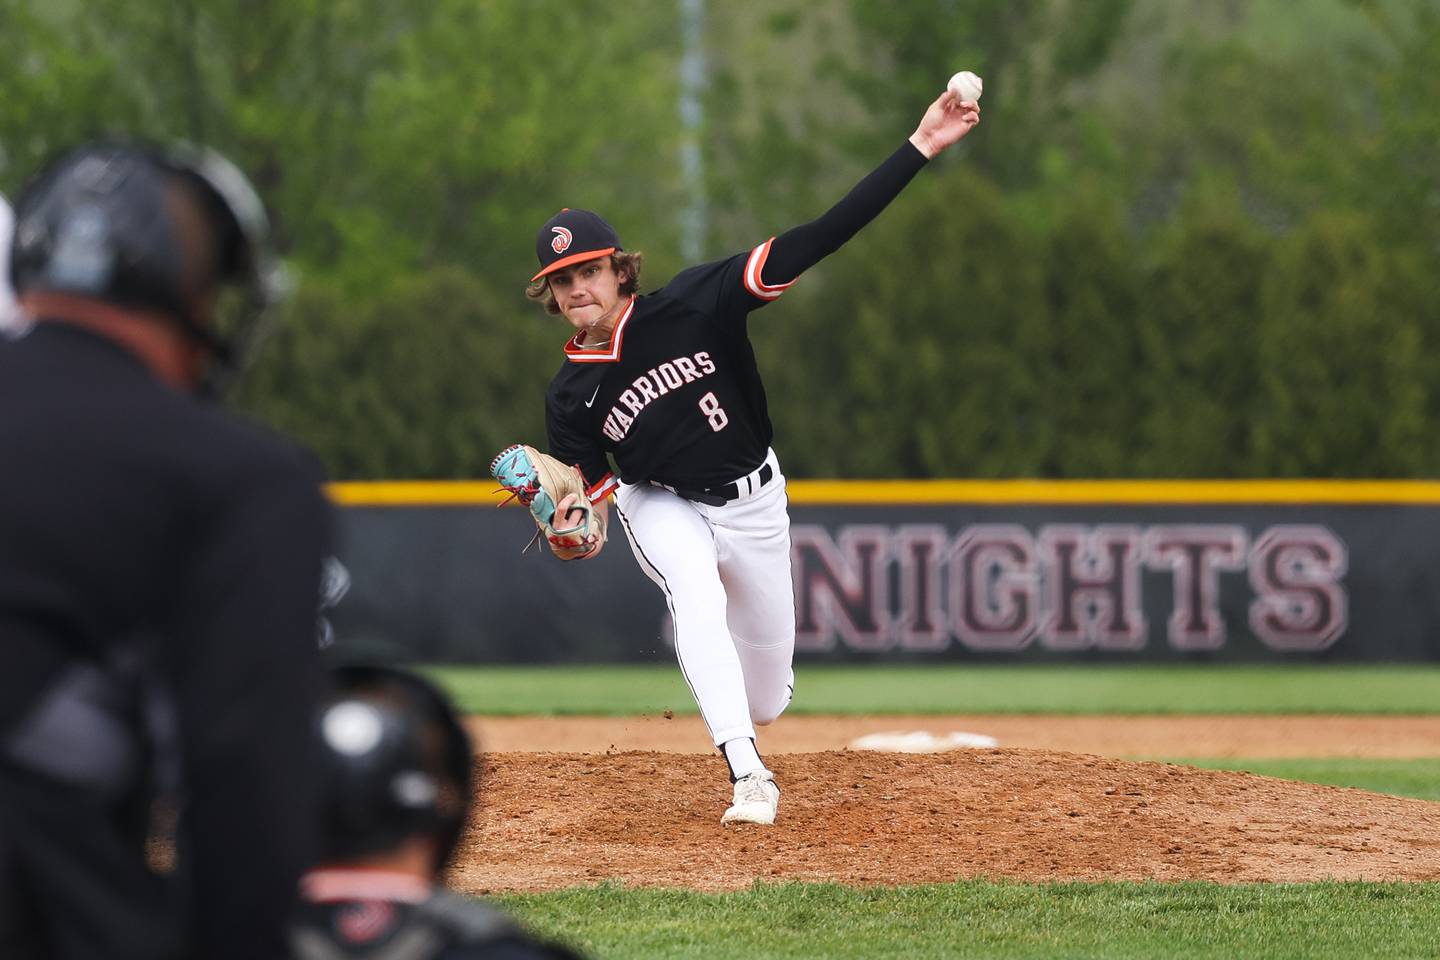 Lincoln-Way West’s Conor Essenburg against Lincoln-Way Central on Monday, May 8, 2023 in New Lenox.